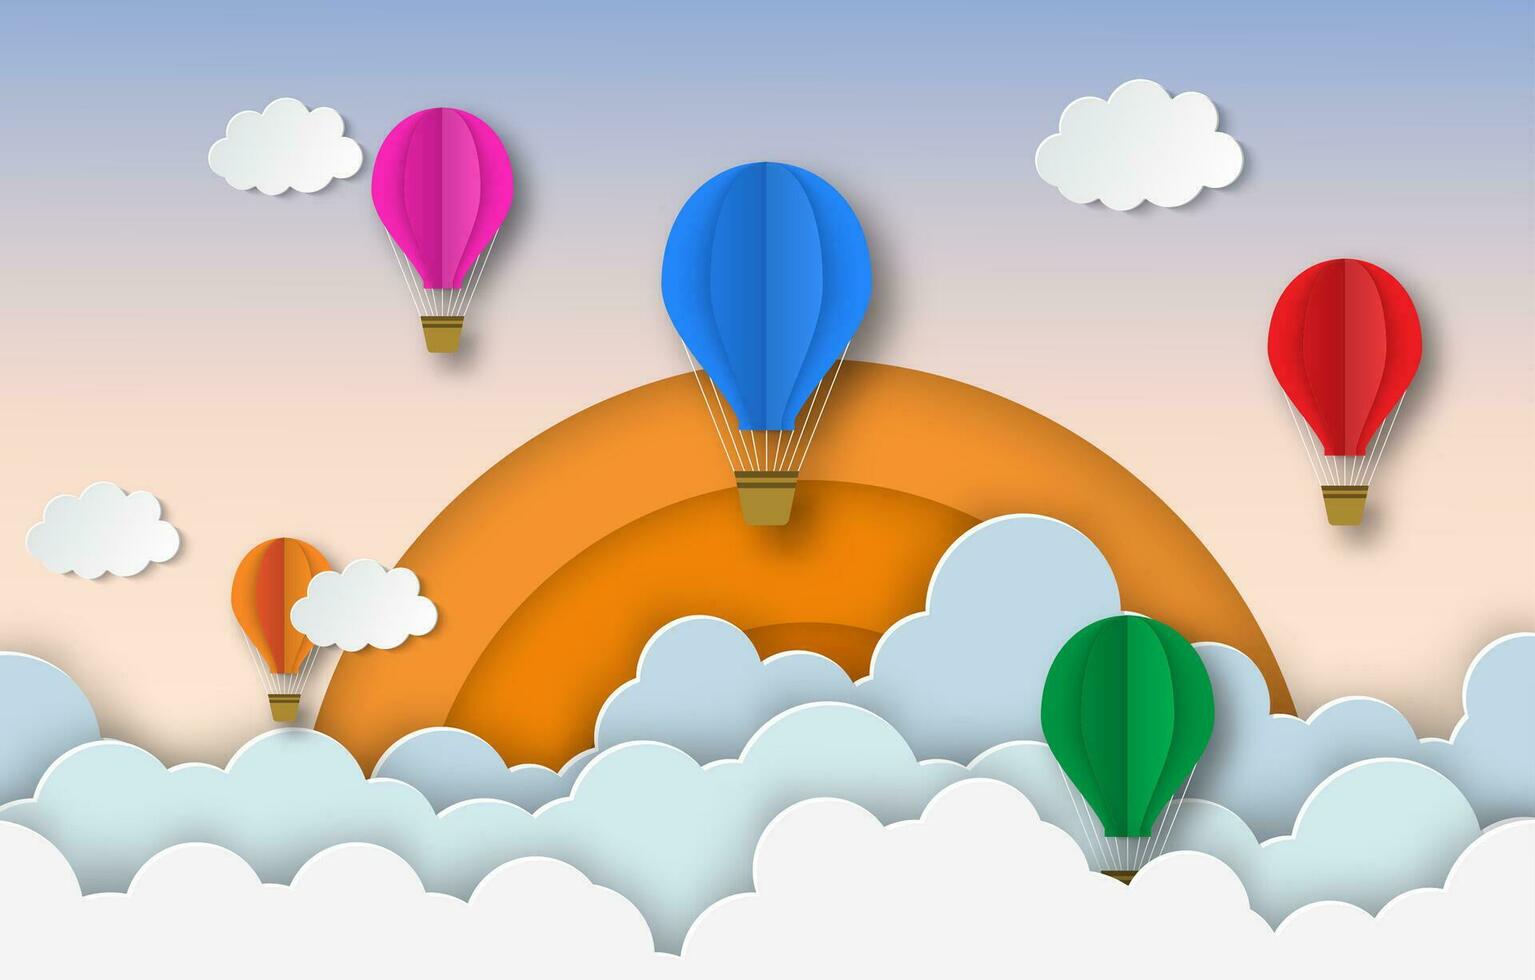 colorful hot air balloons flying in the air with blue cloudy sky background with beautiful sunset. Paper cut poster template with air balloons. flyers, banners, posters and templates design. vector